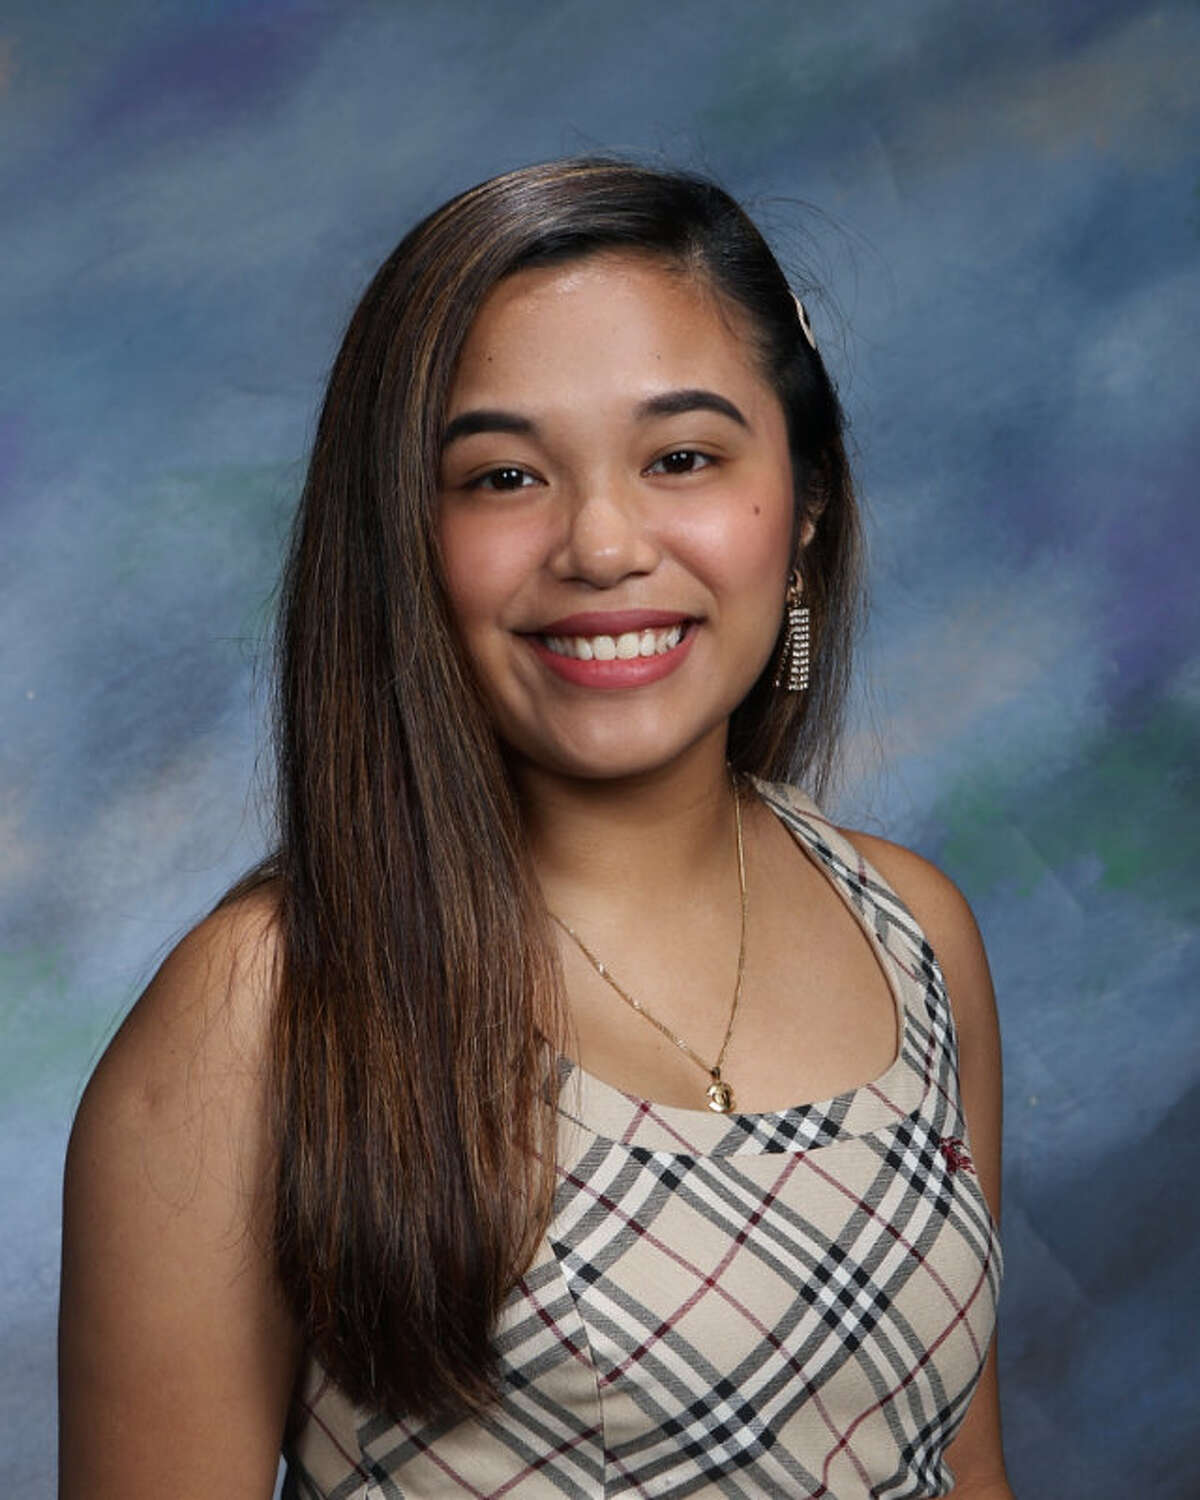 Ansonia Ansonia High School — Jere Mae Pintacasi Hometown: Ansonia GPA: 4.05 Intended university, major: UConn, Bachelor's of Science in nursing Accolades: The Junior States of America/Debate Club, National Honor Society Historian, World Language Honor Society, Art Honor Society, Student representative (9th and 11th grade), Sikorsky STEM Challenge, Ansonia High School Youth Chapter of the NAACP, Environmental Club, Human Relations Club, Future Business Leaders Association, Student Ambassadors, Robotics Club, Academic Excellence Award (10th and 11th grade), Governor’s Scholars Semi-finalist (11th grade), Excellence in Spanish 2 (10th grade), Excellence in Spanish 3 (11th grade), PSATs Excellence Award (9, 10, 11), Several Honors Societies: National Honor Society, World Language Honor Society, Art Honor Society